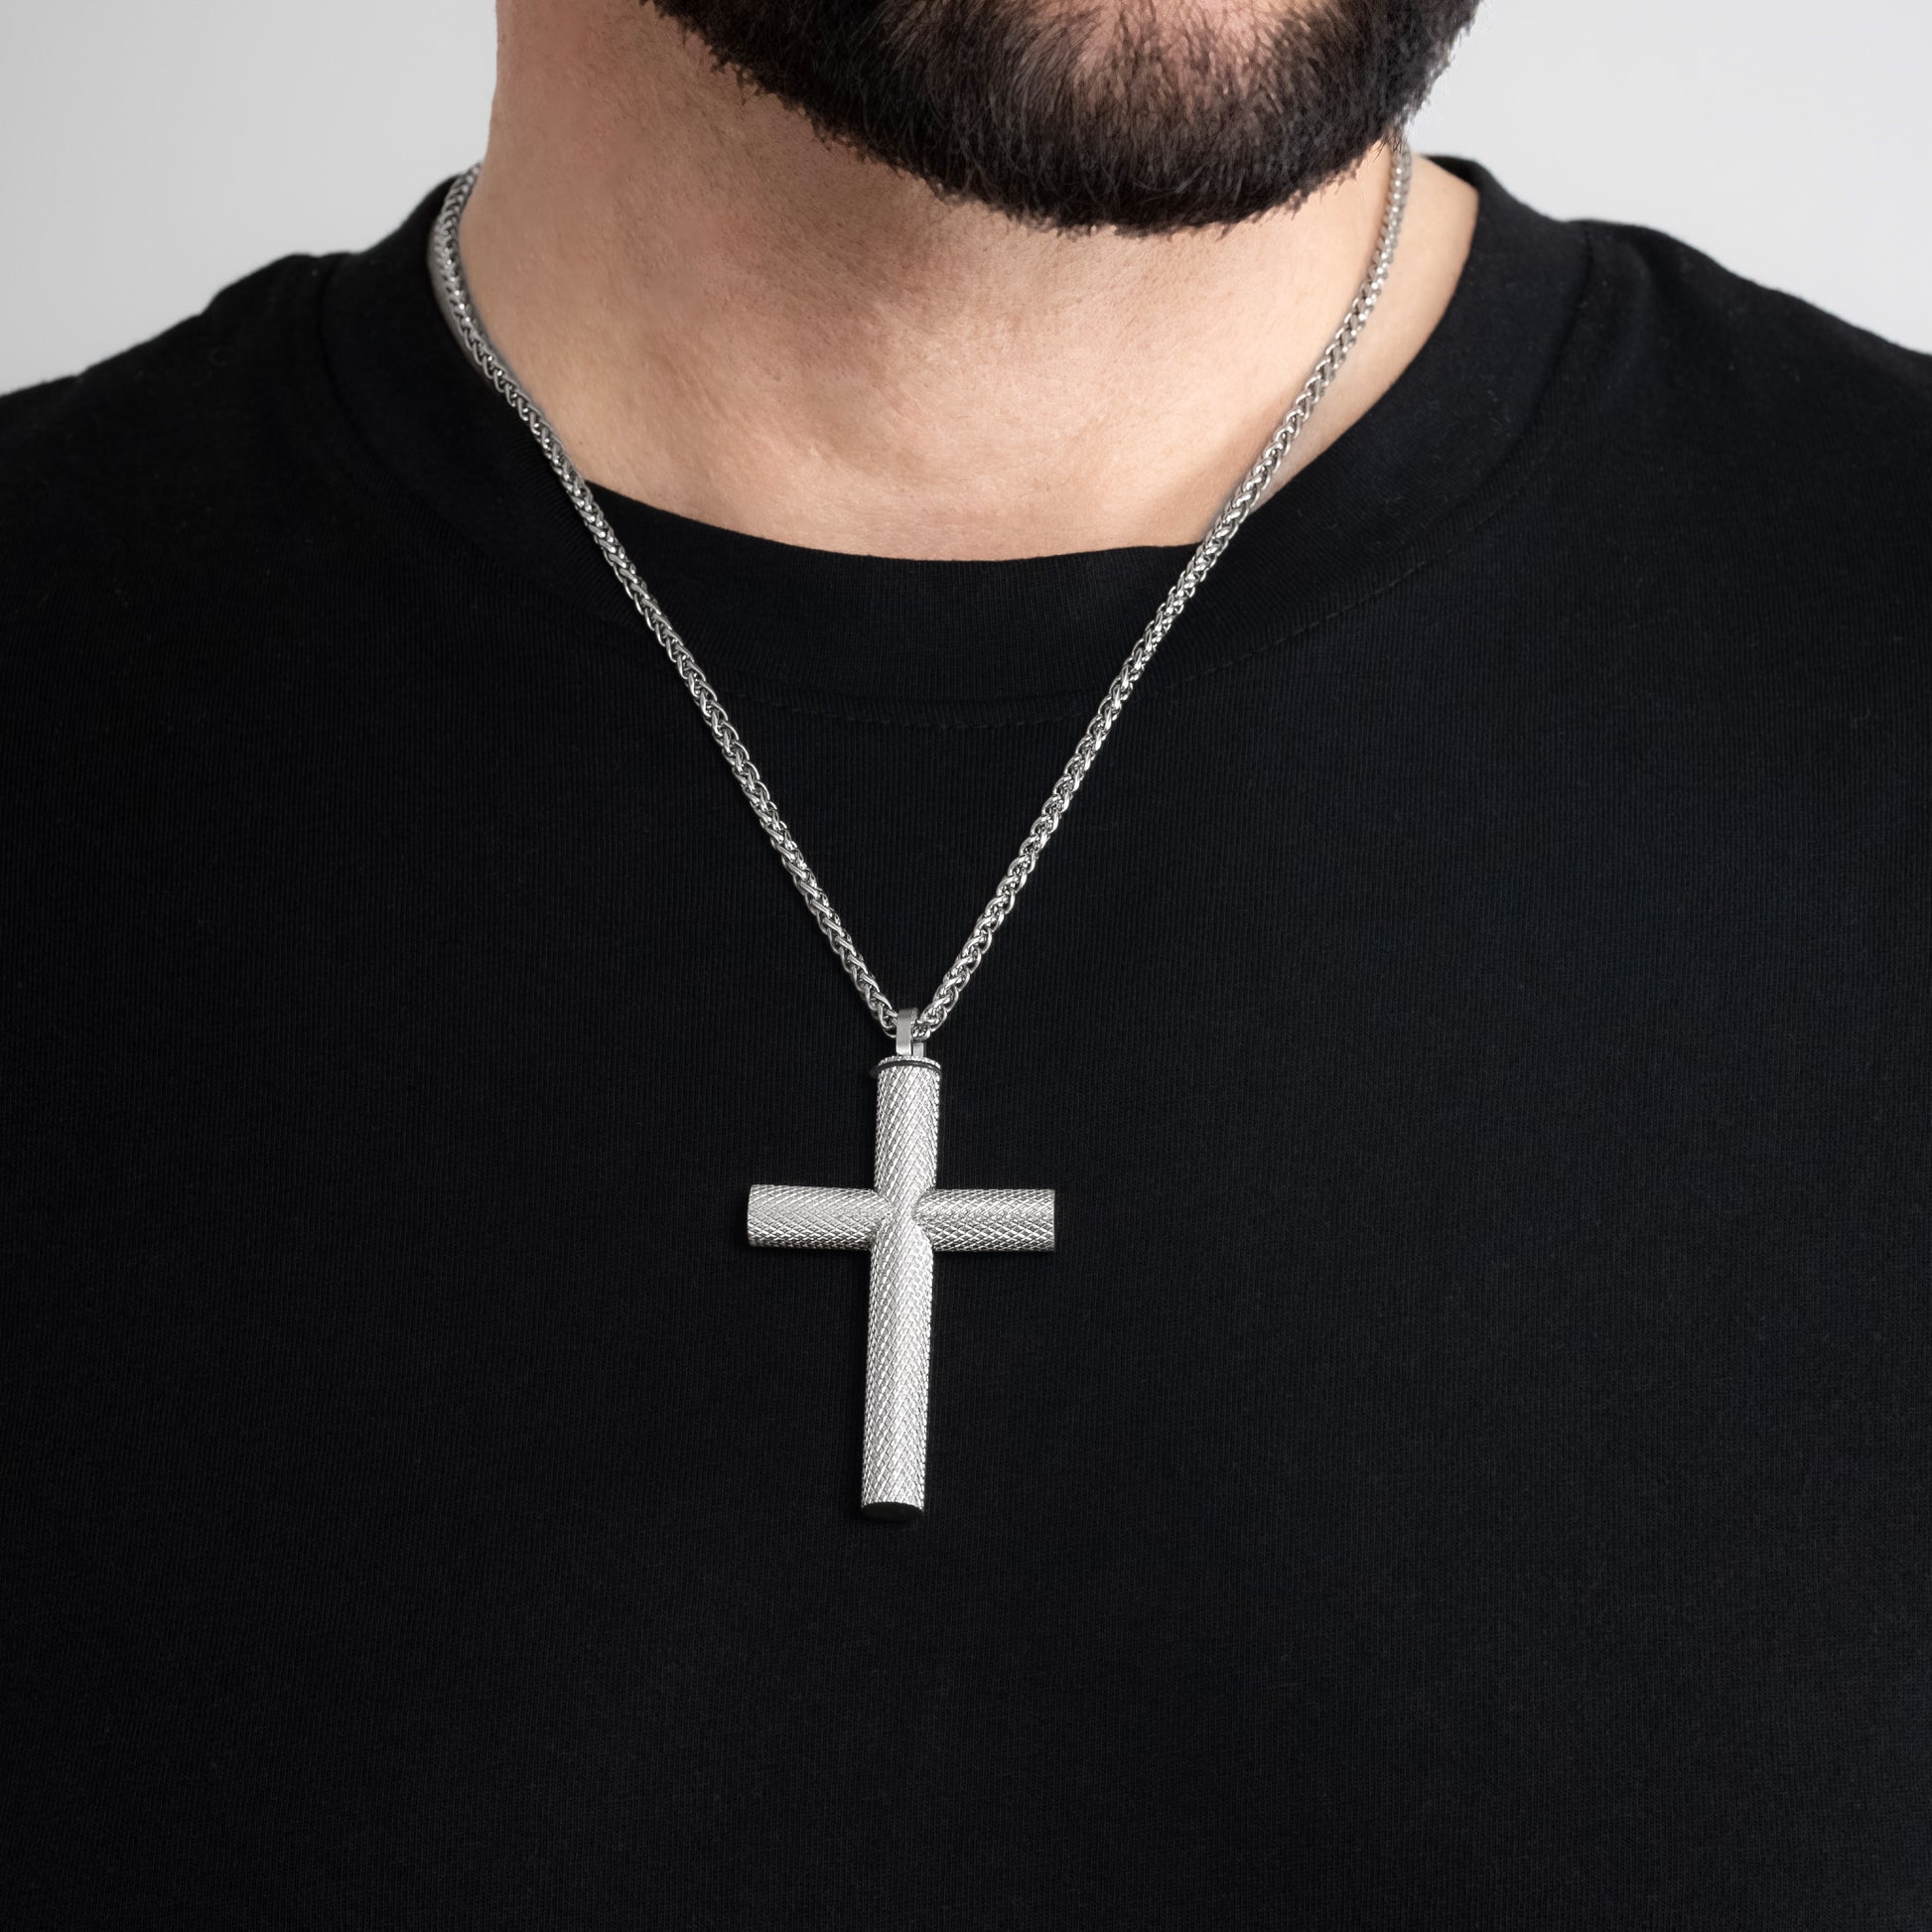 A male model in a black t-shirt wearing a Bison Cross Silver Self-fill Pendant with a 3mm Silver Spiga chain 22 inches. Close-up image of the non-tarnish trending religious men's necklace.